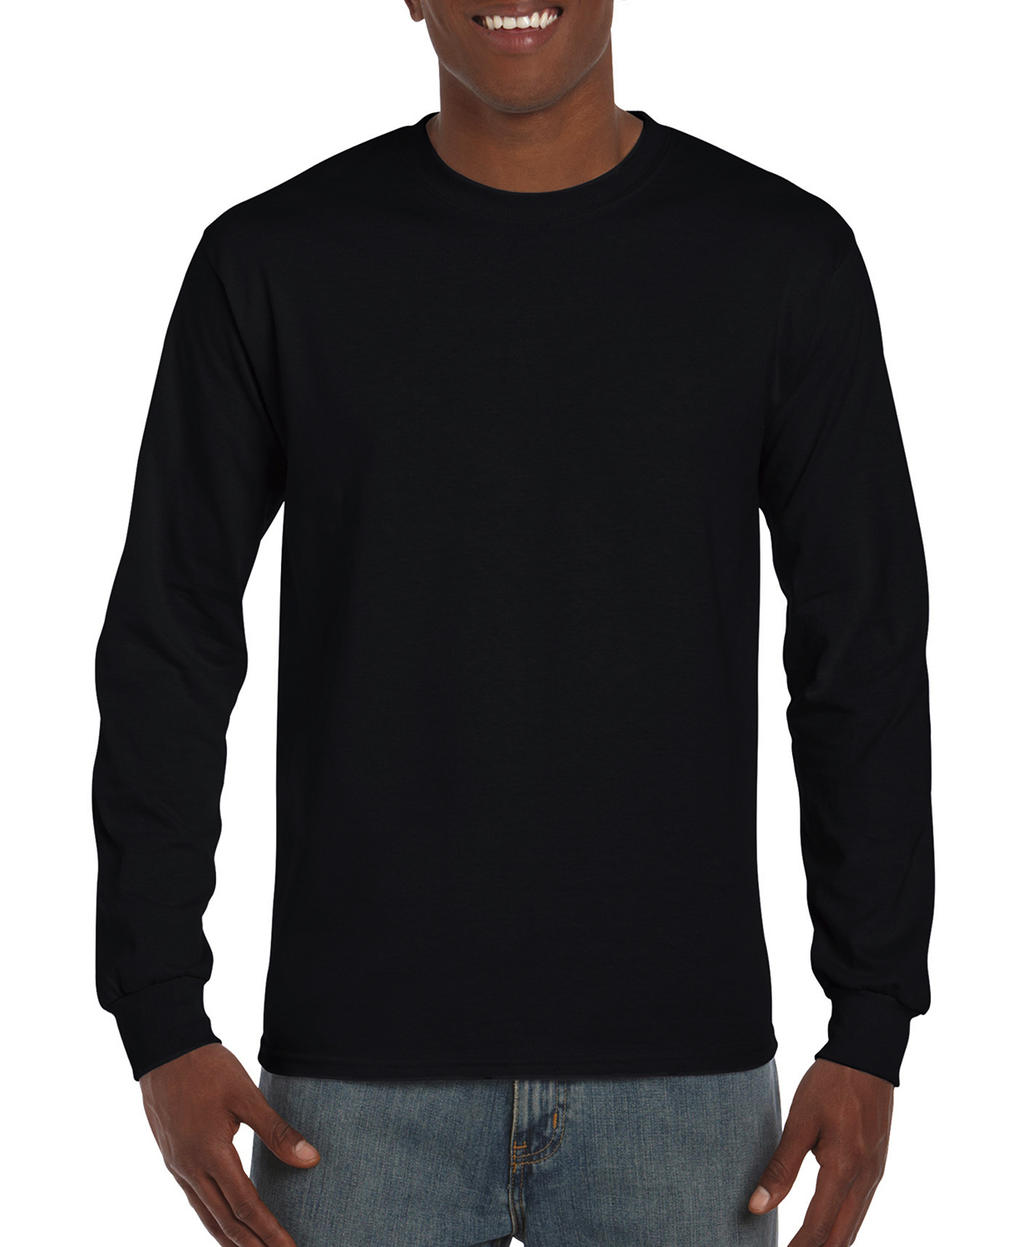  Hammer? Adult Long Sleeve T-Shirt in Farbe Black